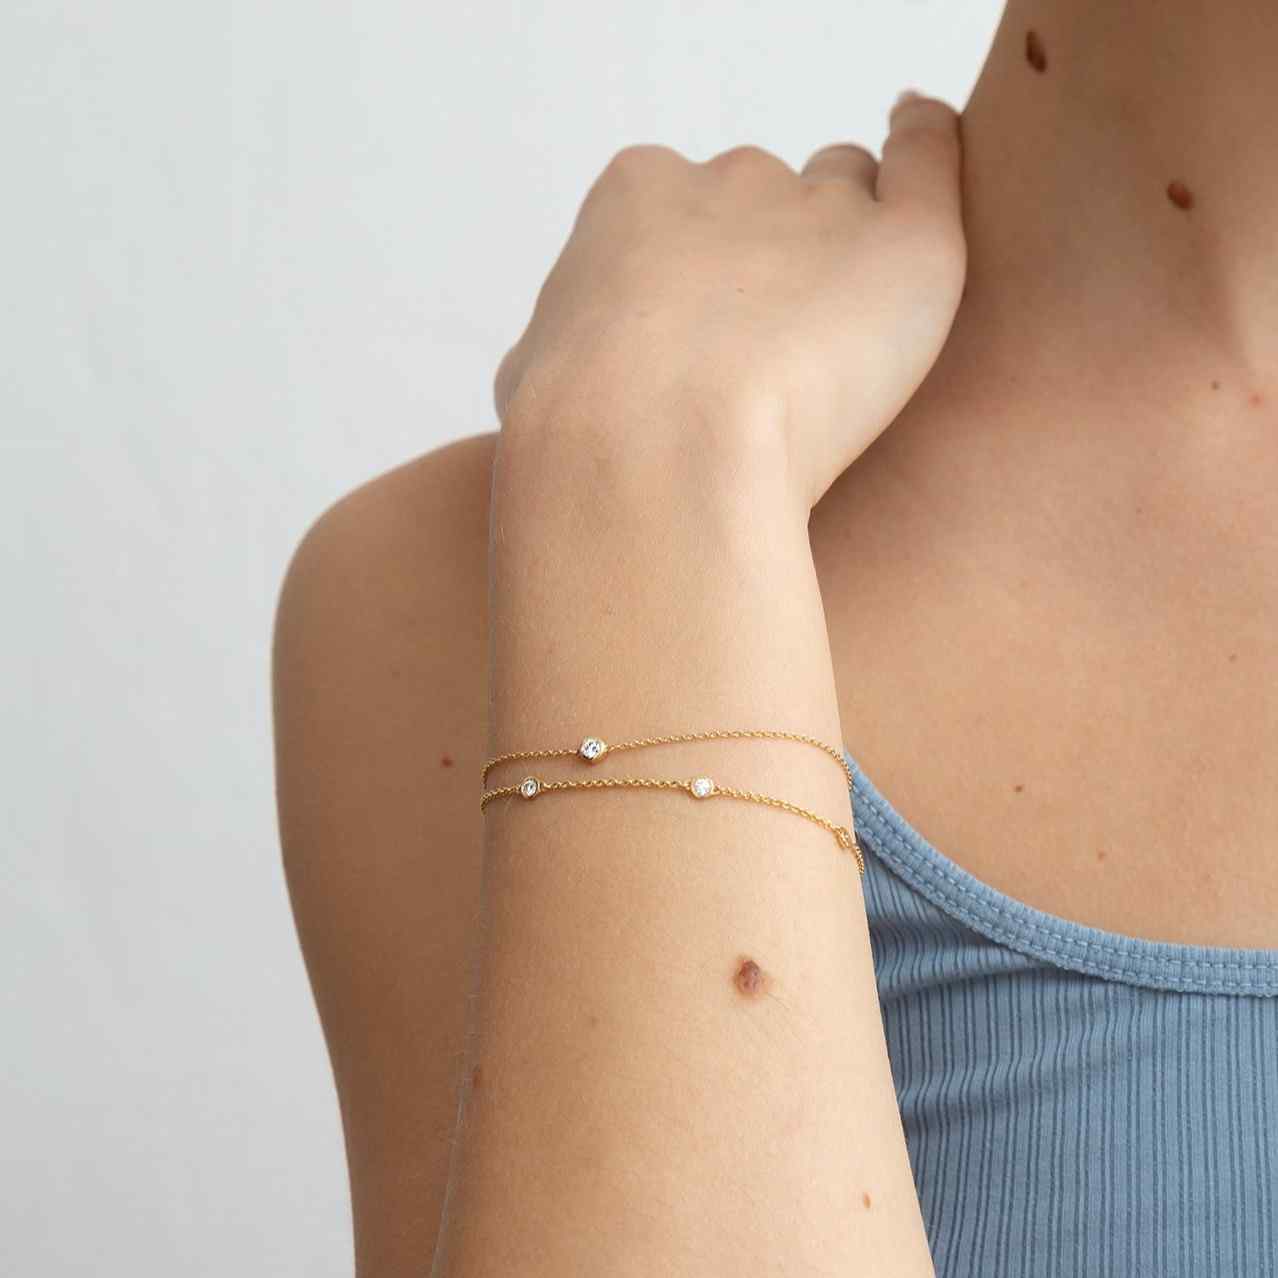 A model wears this delicate bracelet - which features a solitaire 0.1 carat round brilliant bezel set in 18k recycled gold. This bracelet can be adjusted to two different lengths, 6.3" (16 cm) and 6.7" (17 cm). Shown here in Yellow Gold and paired with the Étoiles Bracelet for a delicate bracelet stack.